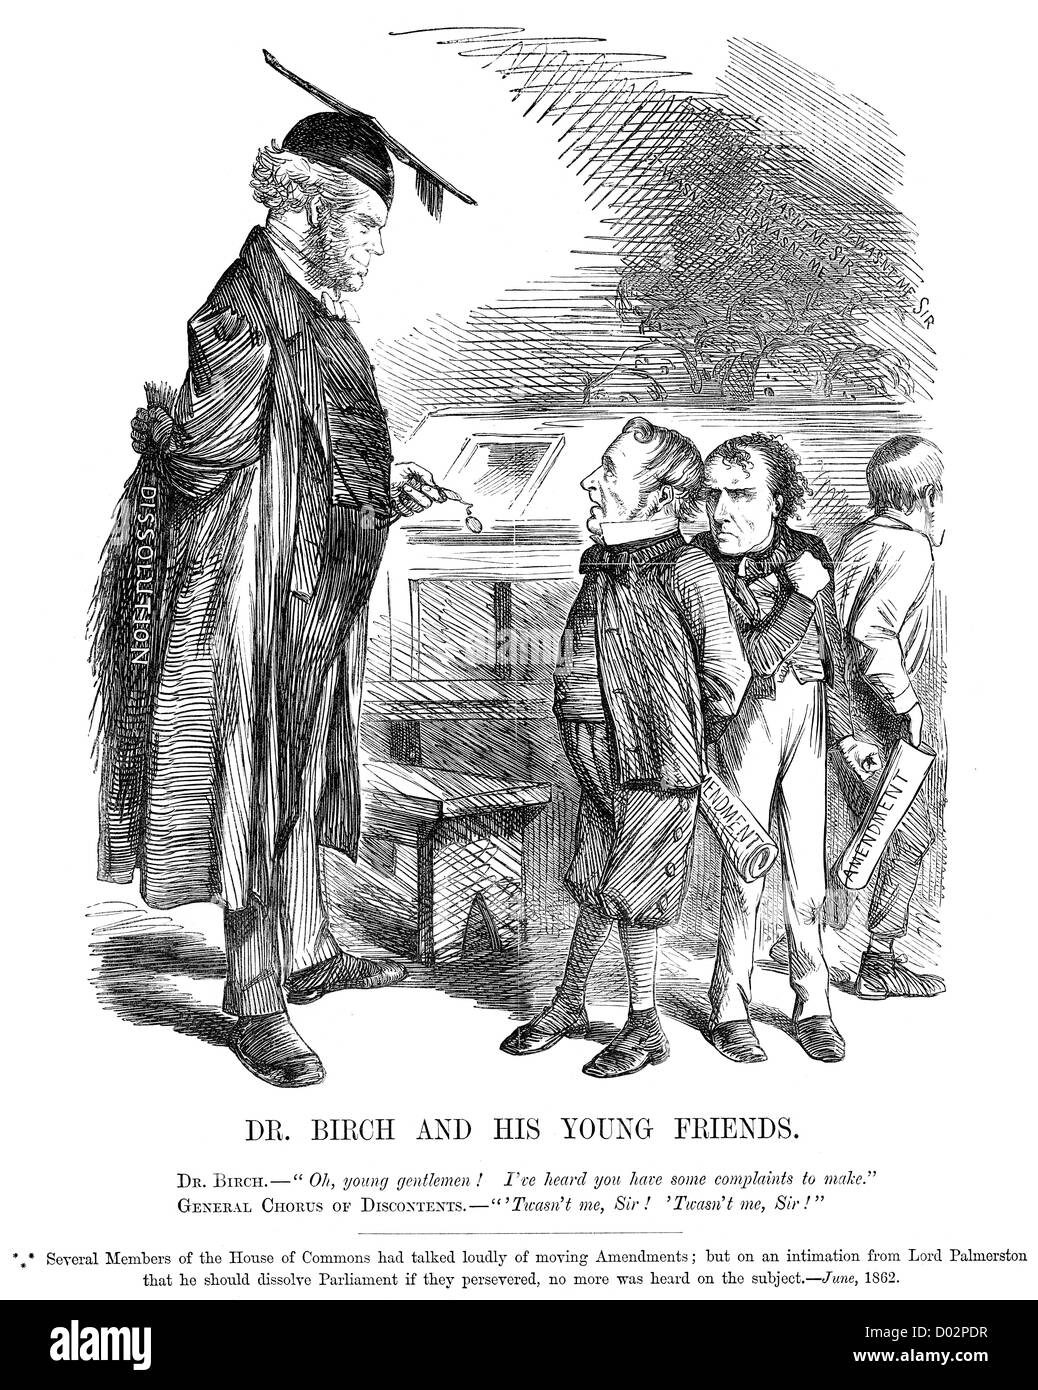 Dr Birch and his Young Friends. Political cartoon about Lord Palmerston threatening to dissolve Parliament, June 1862 Stock Photo